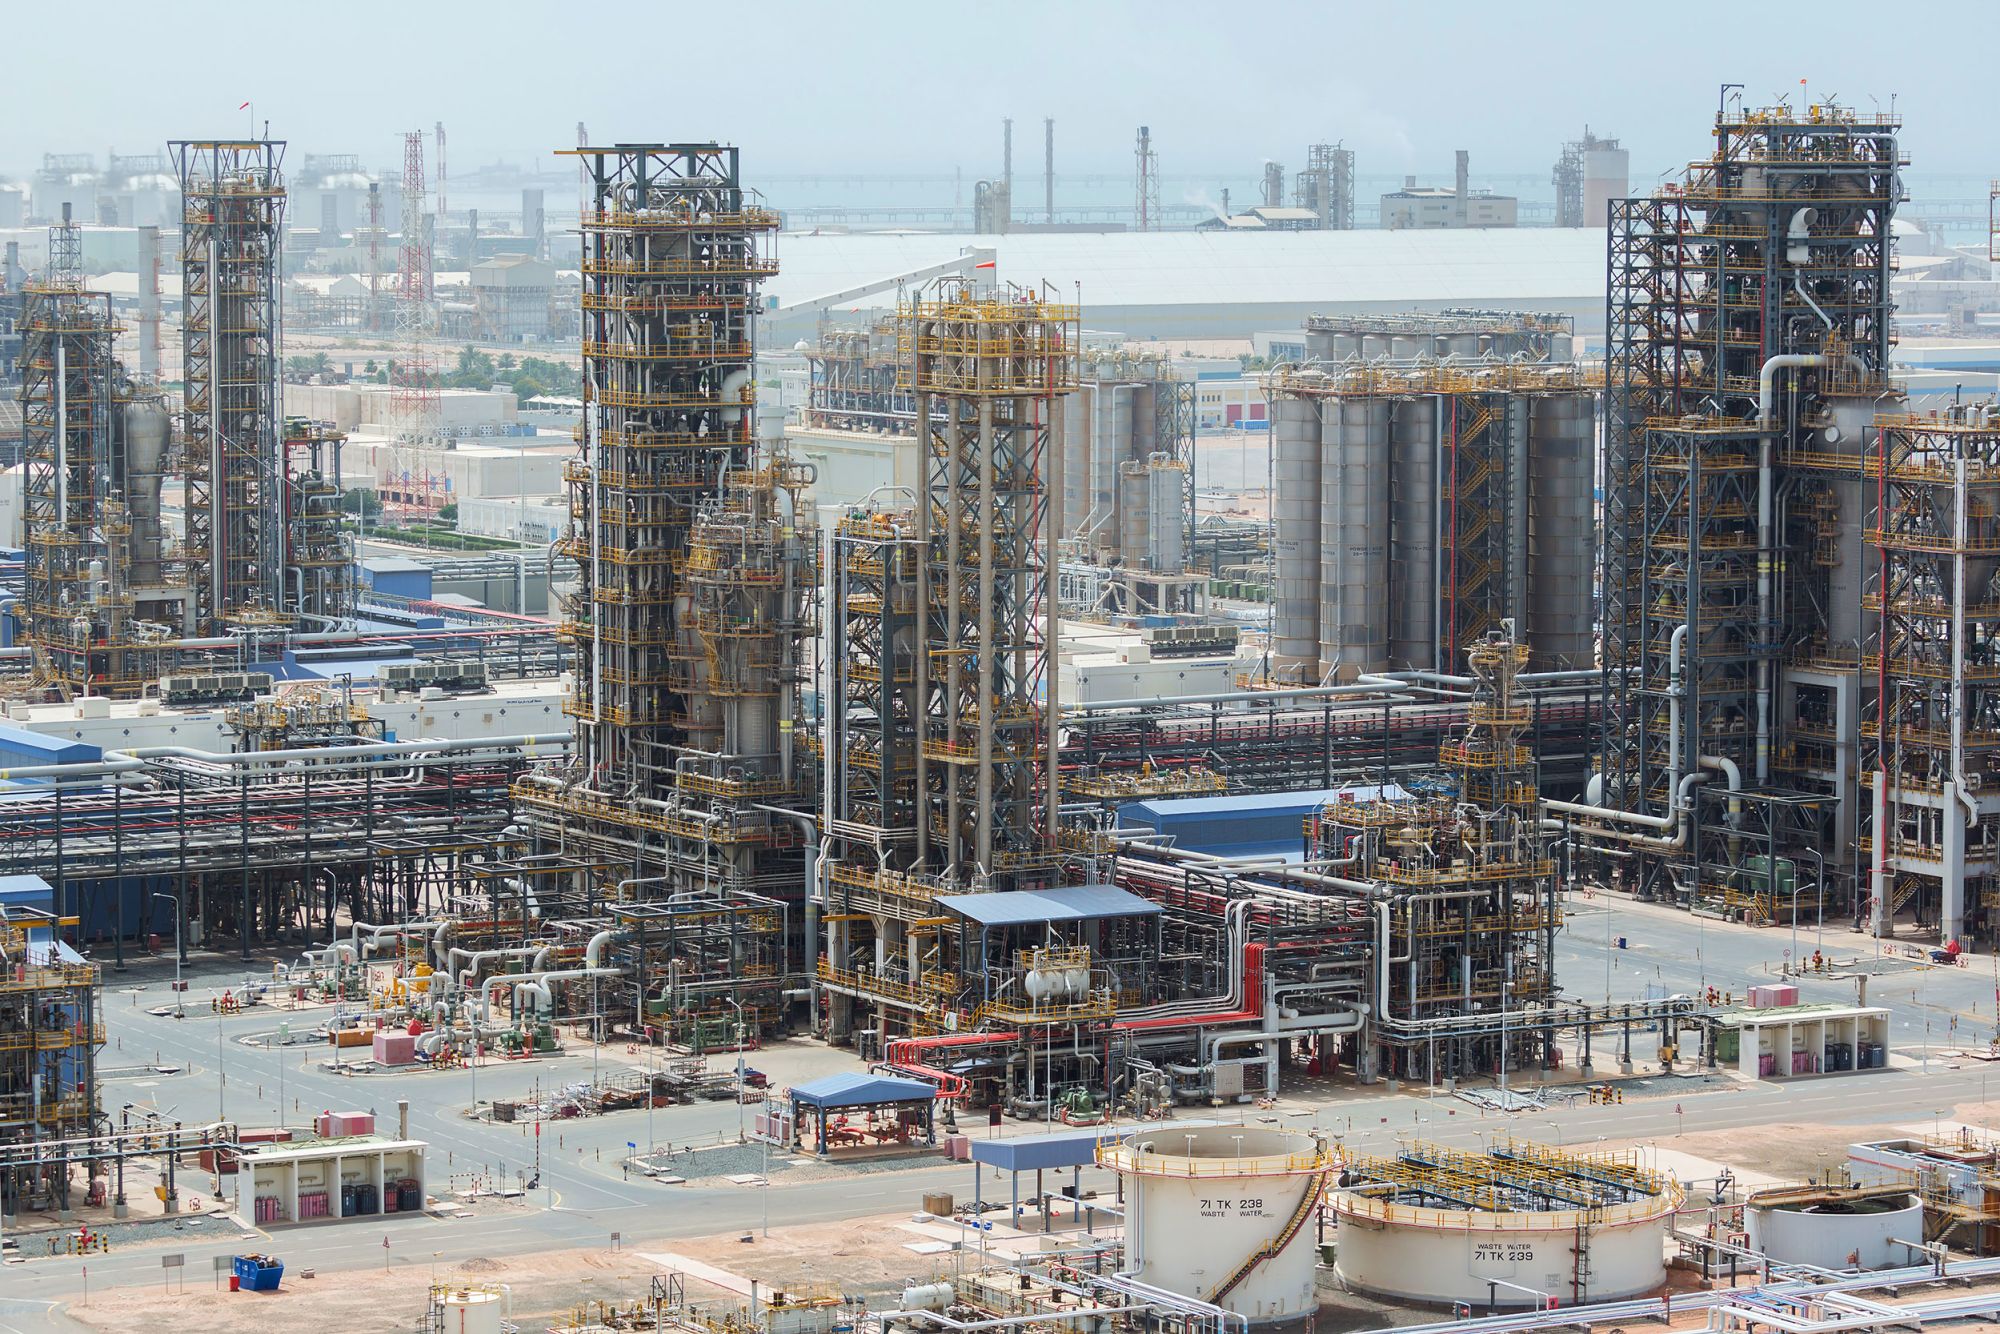 Cracking towers stand at the Ruwais refinery and petrochemical complex, operated by Abu Dhabi National Oil Co. (ADNOC), in Al Ruwais, United Arab Emirates.